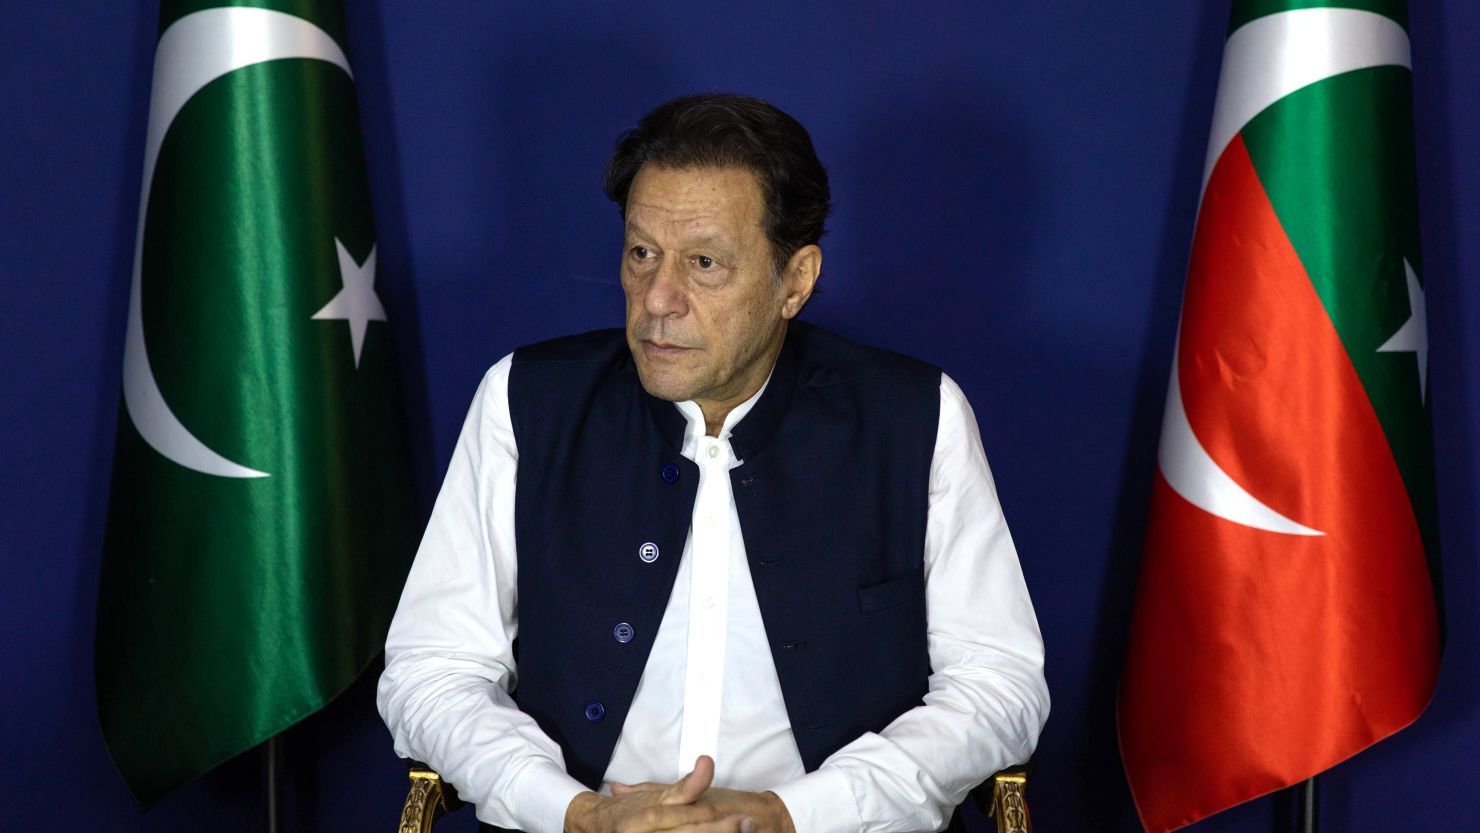 Imran Khan, Pakistan's former prime minister, was already handed two convictions earlier this week.